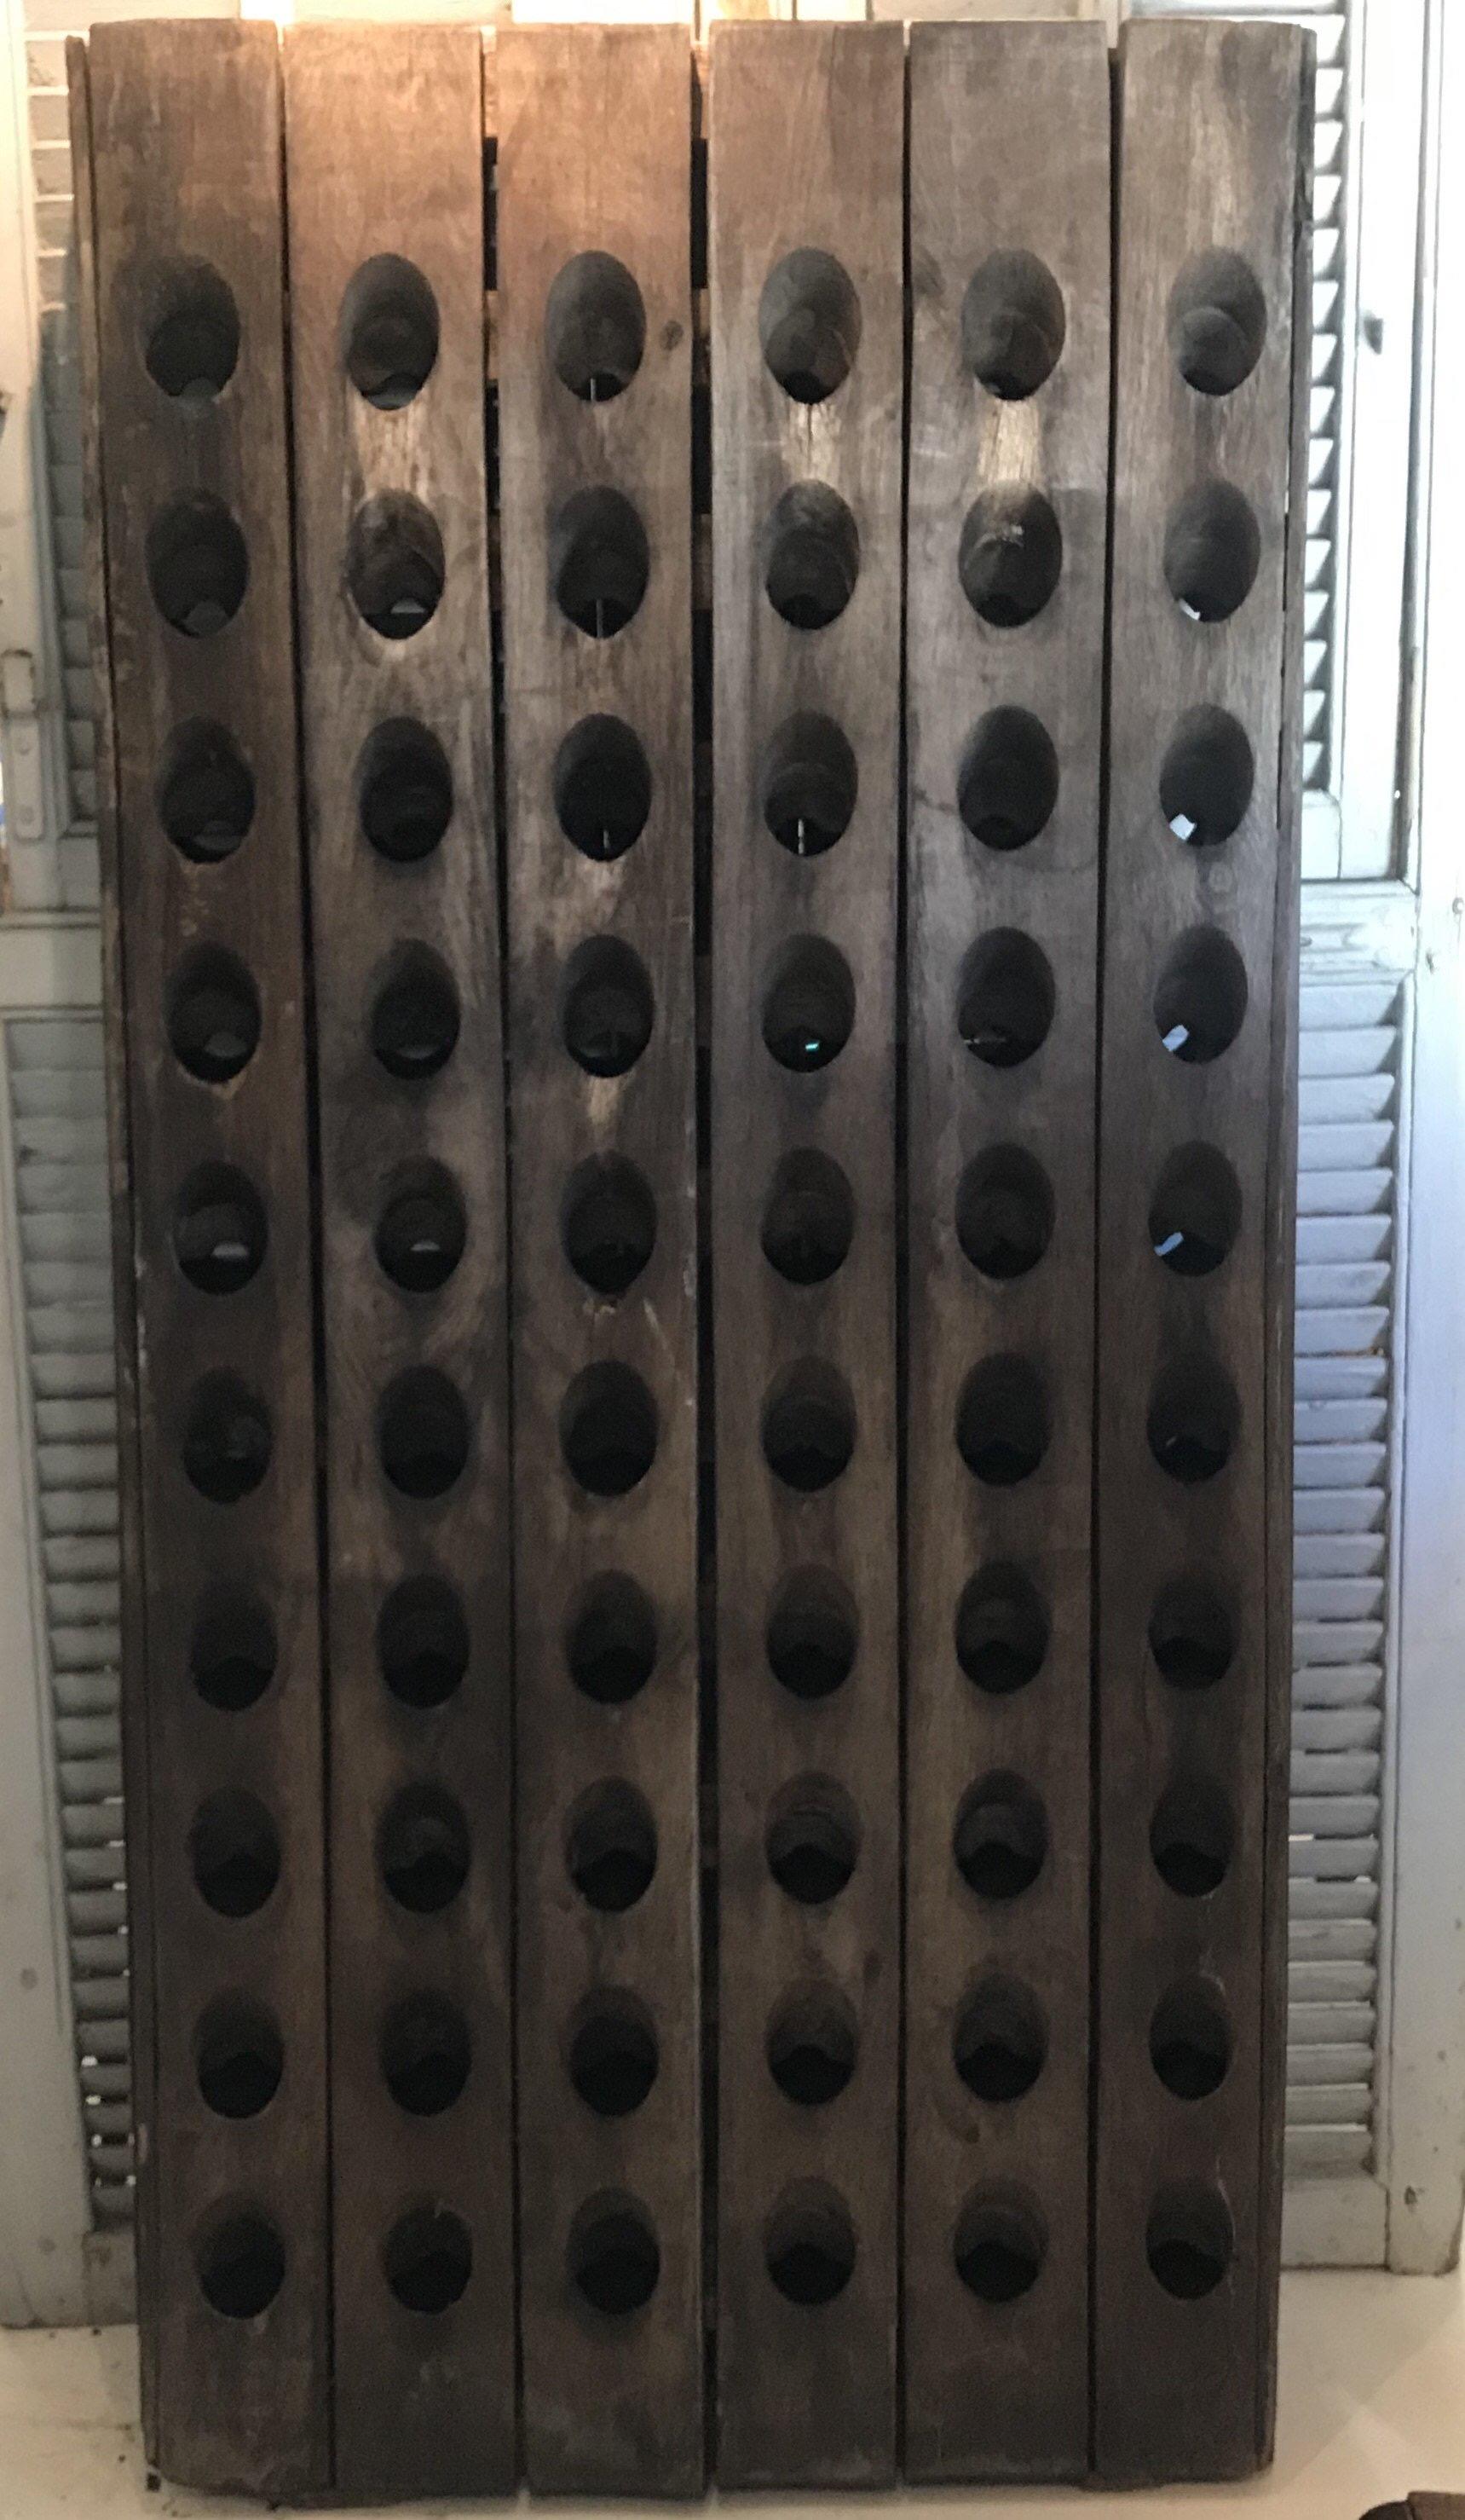 Functional and fabulous authentic oak Provençal champagne or wine rack having two sides for 120 bottles. Two identical sides, 60 bottles per side, having beautiful old patina; wonderful for wine or champagne storage in a wine cellar or as a